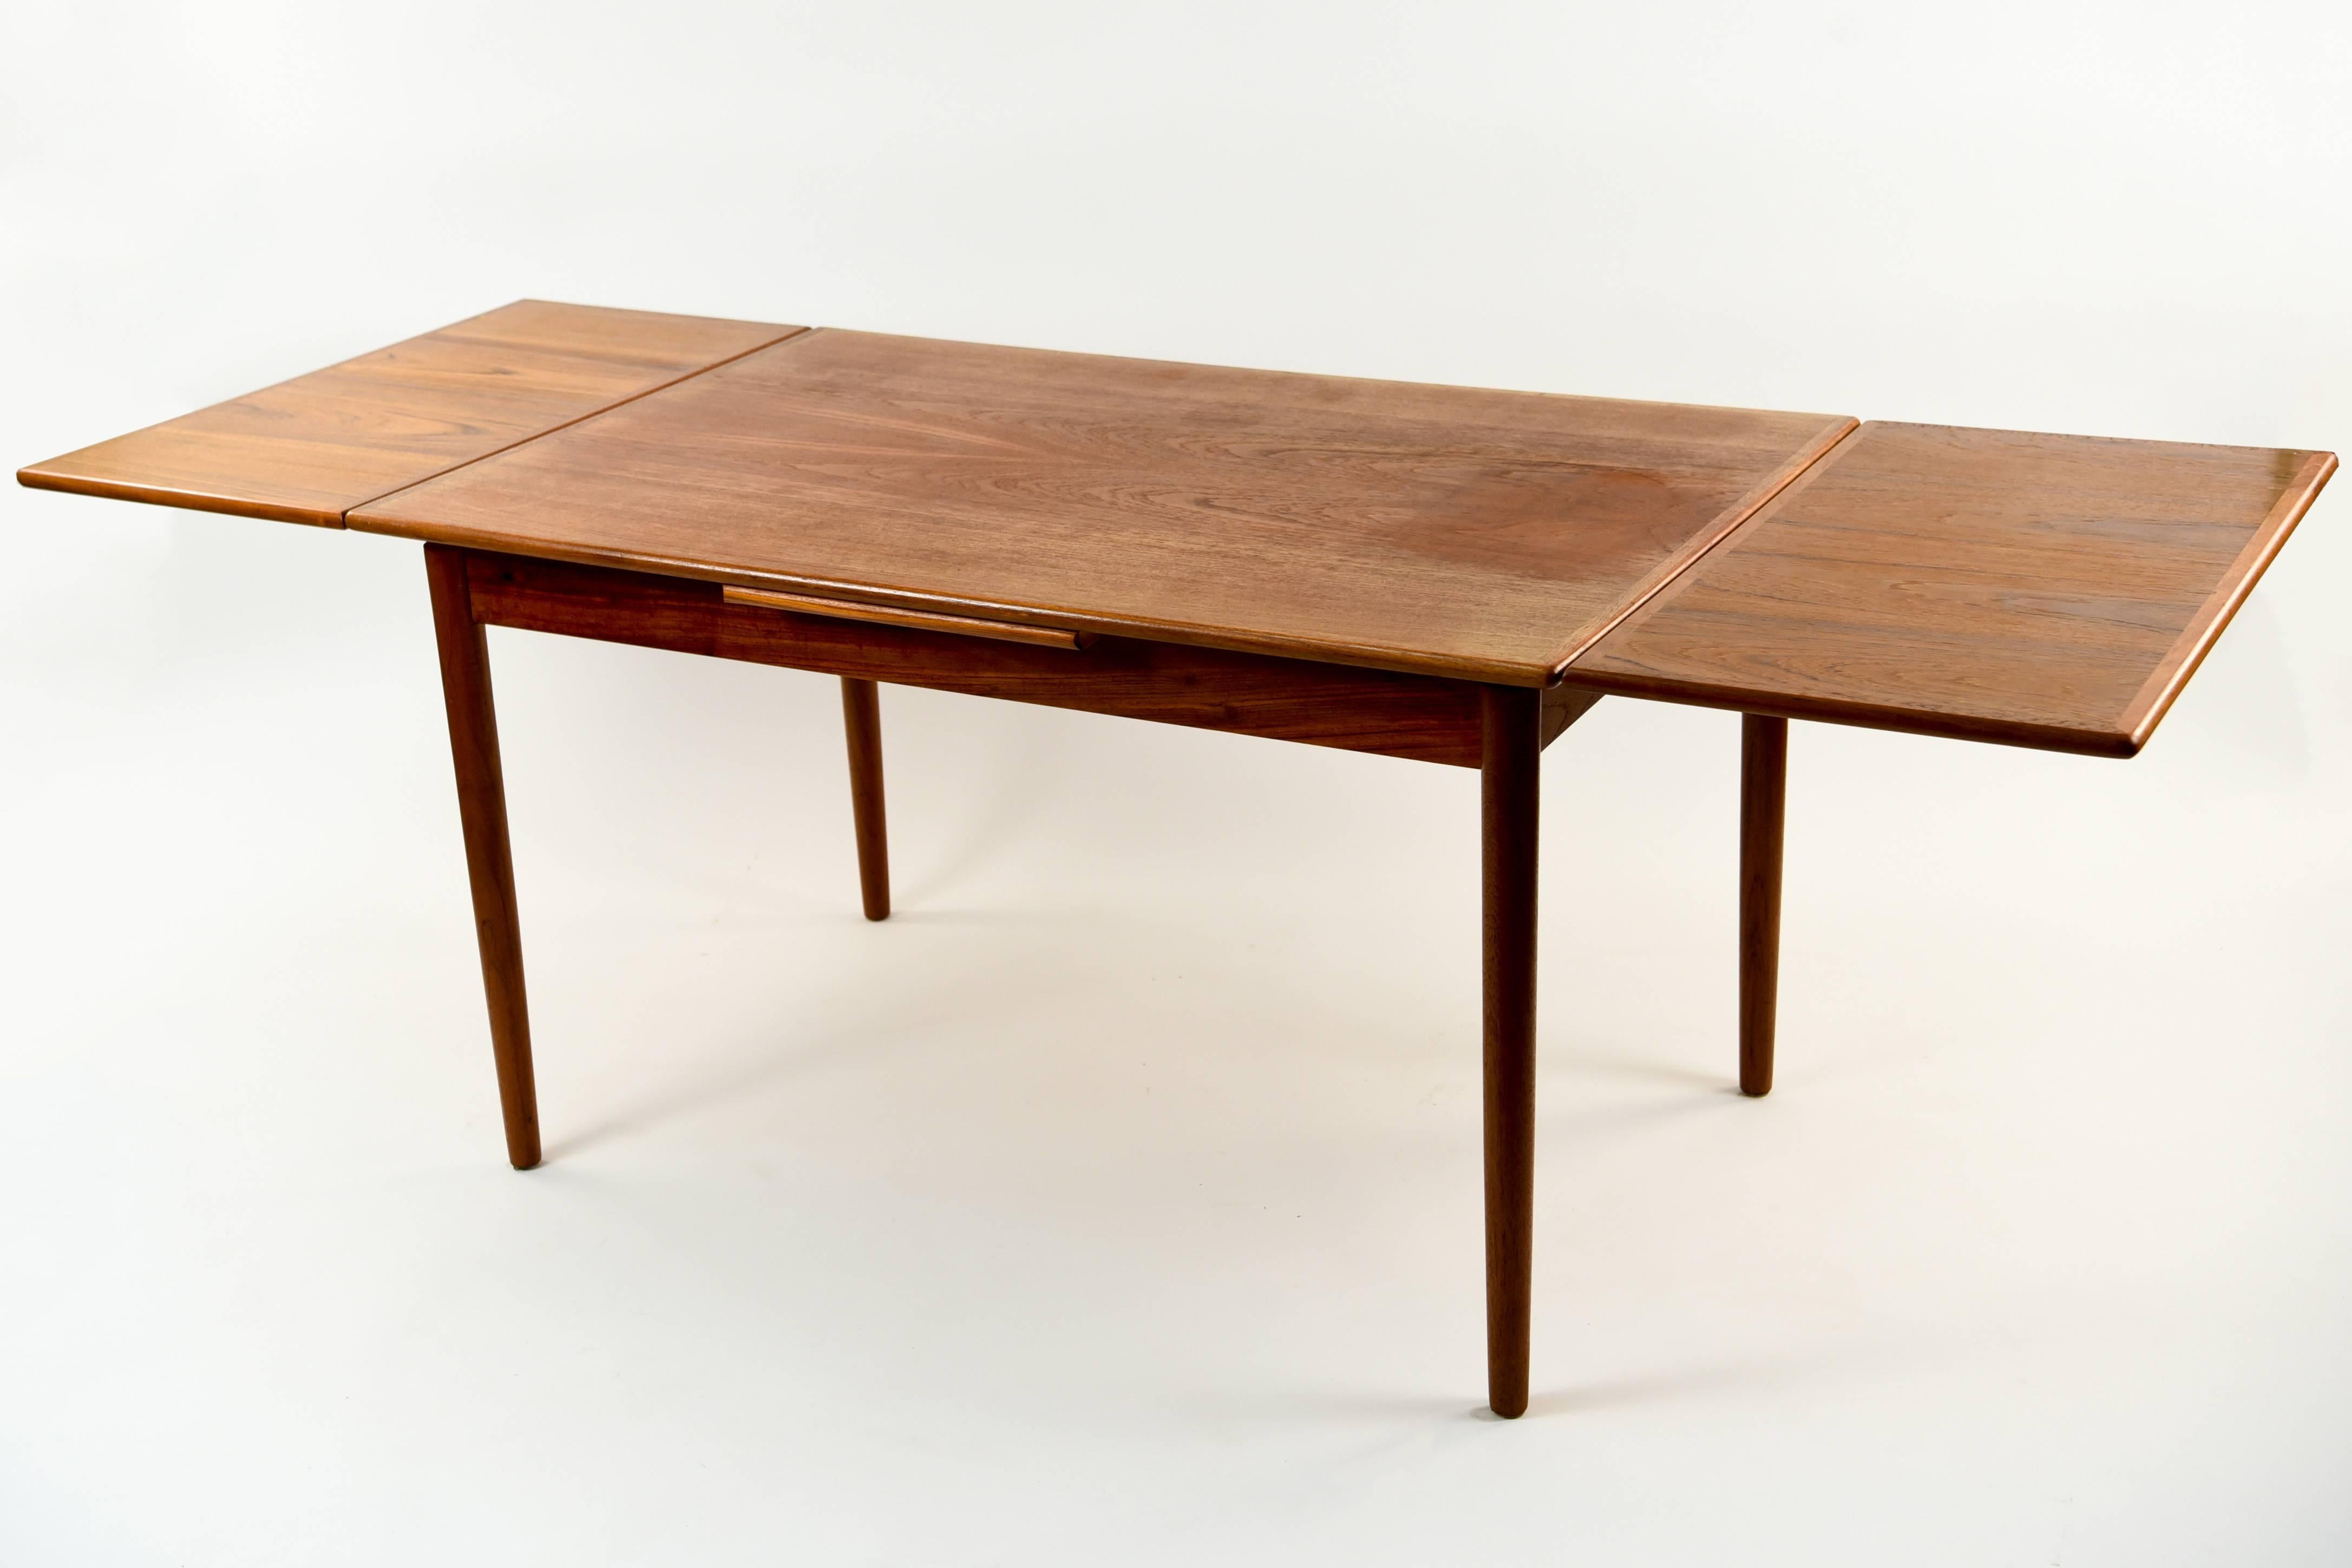 This Danish midcentury dining table is made of teak wood. With a simple yet pleasing form, this table would be a versatile addition into any interior. Features two pull out leaves that each add 17.25